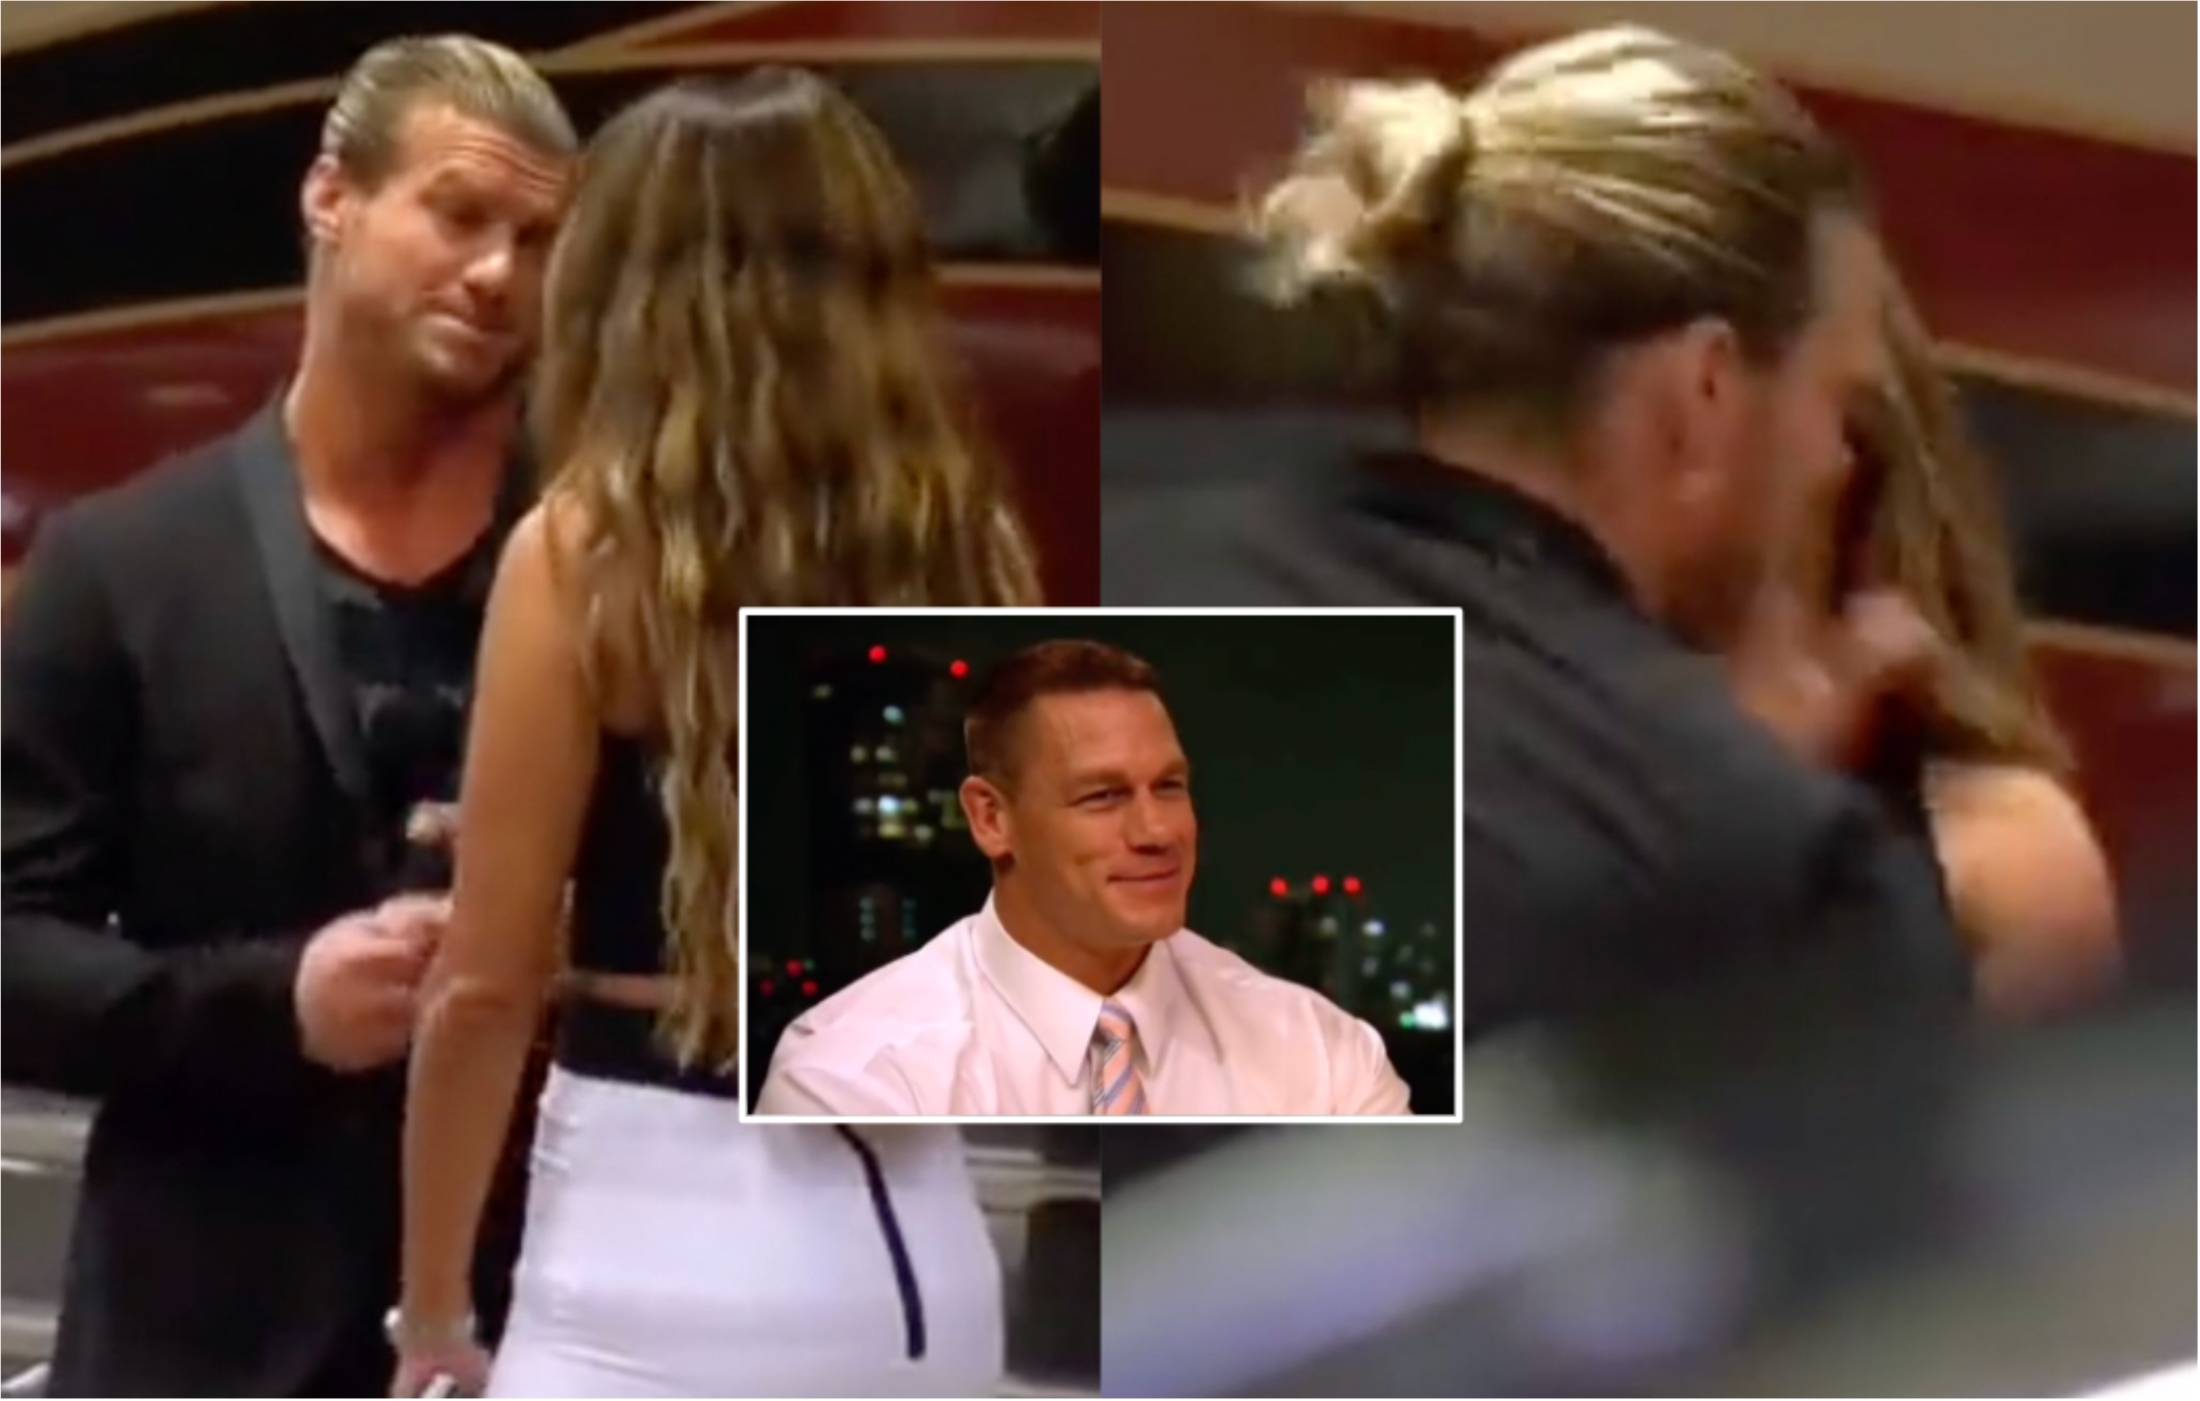 Nikki Bella slapped Dolph Ziggler after he tried to kiss her in 2016